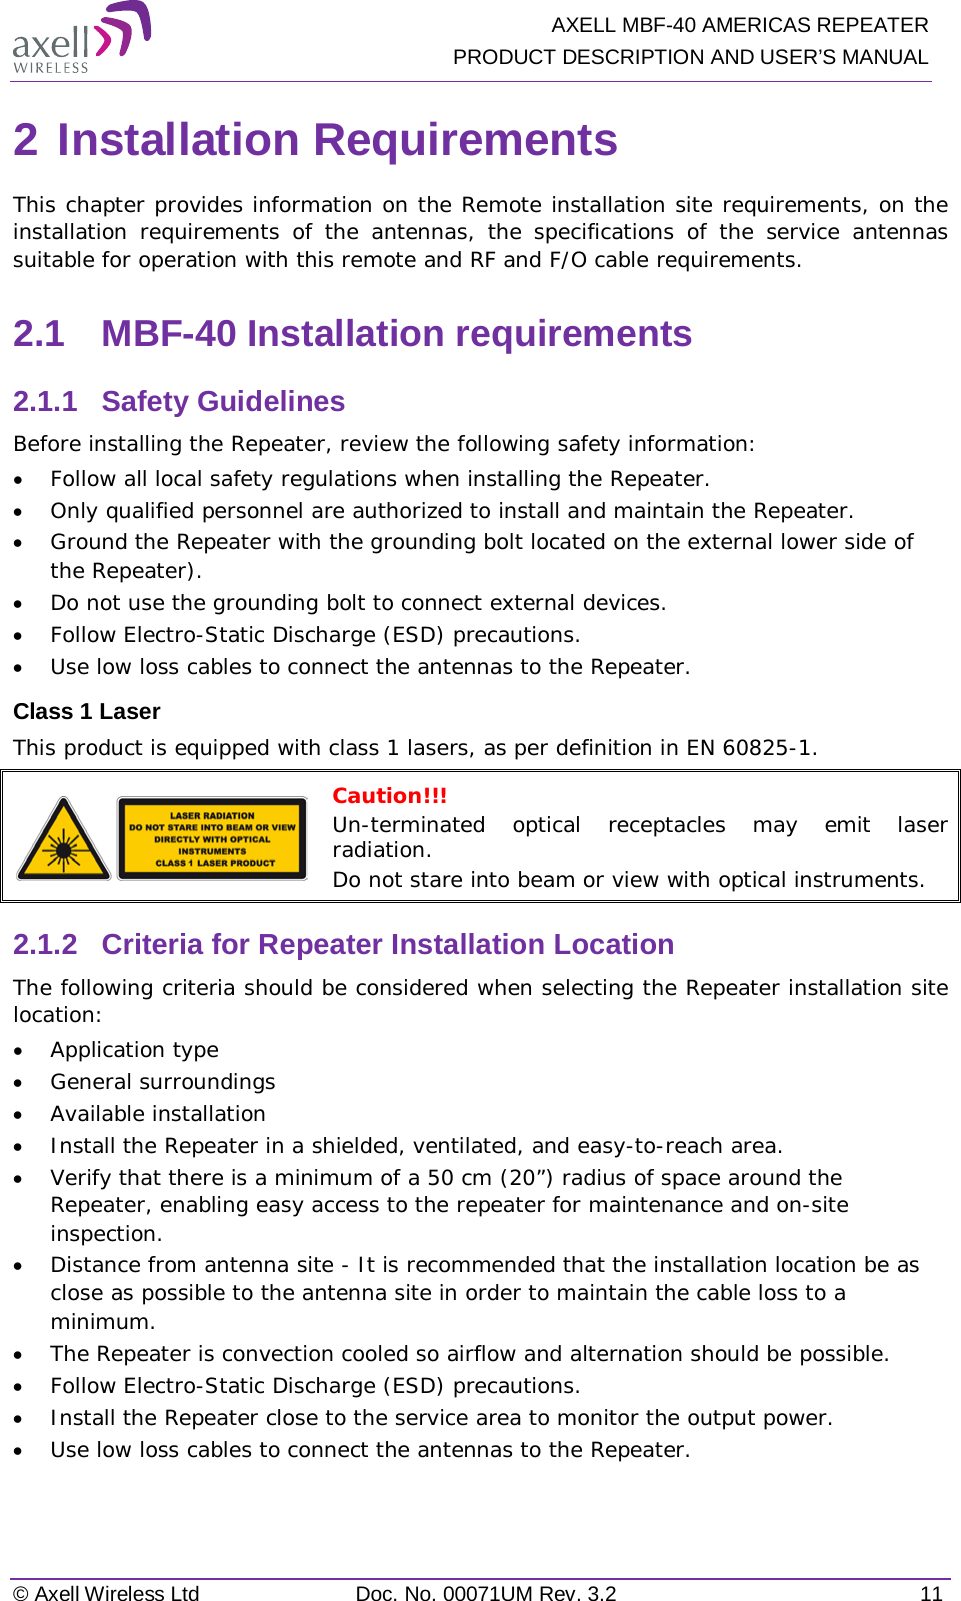   AXELL MBF-40 AMERICAS REPEATER PRODUCT DESCRIPTION AND USER’S MANUAL © Axell Wireless Ltd Doc. No. 00071UM Rev. 3.2 11 2 Installation Requirements This chapter provides information on the Remote installation site requirements, on the installation requirements of the antennas,  the specifications of the service antennas suitable for operation with this remote and RF and F/O cable requirements. 2.1  MBF-40 Installation requirements 2.1.1  Safety Guidelines Before installing the Repeater, review the following safety information:  • Follow all local safety regulations when installing the Repeater. • Only qualified personnel are authorized to install and maintain the Repeater. • Ground the Repeater with the grounding bolt located on the external lower side of the Repeater). • Do not use the grounding bolt to connect external devices. • Follow Electro-Static Discharge (ESD) precautions. • Use low loss cables to connect the antennas to the Repeater. Class 1 Laser This product is equipped with class 1 lasers, as per definition in EN 60825-1.   Caution!!! Un-terminated optical receptacles may emit laser radiation. Do not stare into beam or view with optical instruments. 2.1.2  Criteria for Repeater Installation Location The following criteria should be considered when selecting the Repeater installation site location: • Application type • General surroundings • Available installation • Install the Repeater in a shielded, ventilated, and easy-to-reach area. • Verify that there is a minimum of a 50 cm (20”) radius of space around the Repeater, enabling easy access to the repeater for maintenance and on-site inspection. • Distance from antenna site - It is recommended that the installation location be as close as possible to the antenna site in order to maintain the cable loss to a minimum. • The Repeater is convection cooled so airflow and alternation should be possible. • Follow Electro-Static Discharge (ESD) precautions. • Install the Repeater close to the service area to monitor the output power. • Use low loss cables to connect the antennas to the Repeater. 